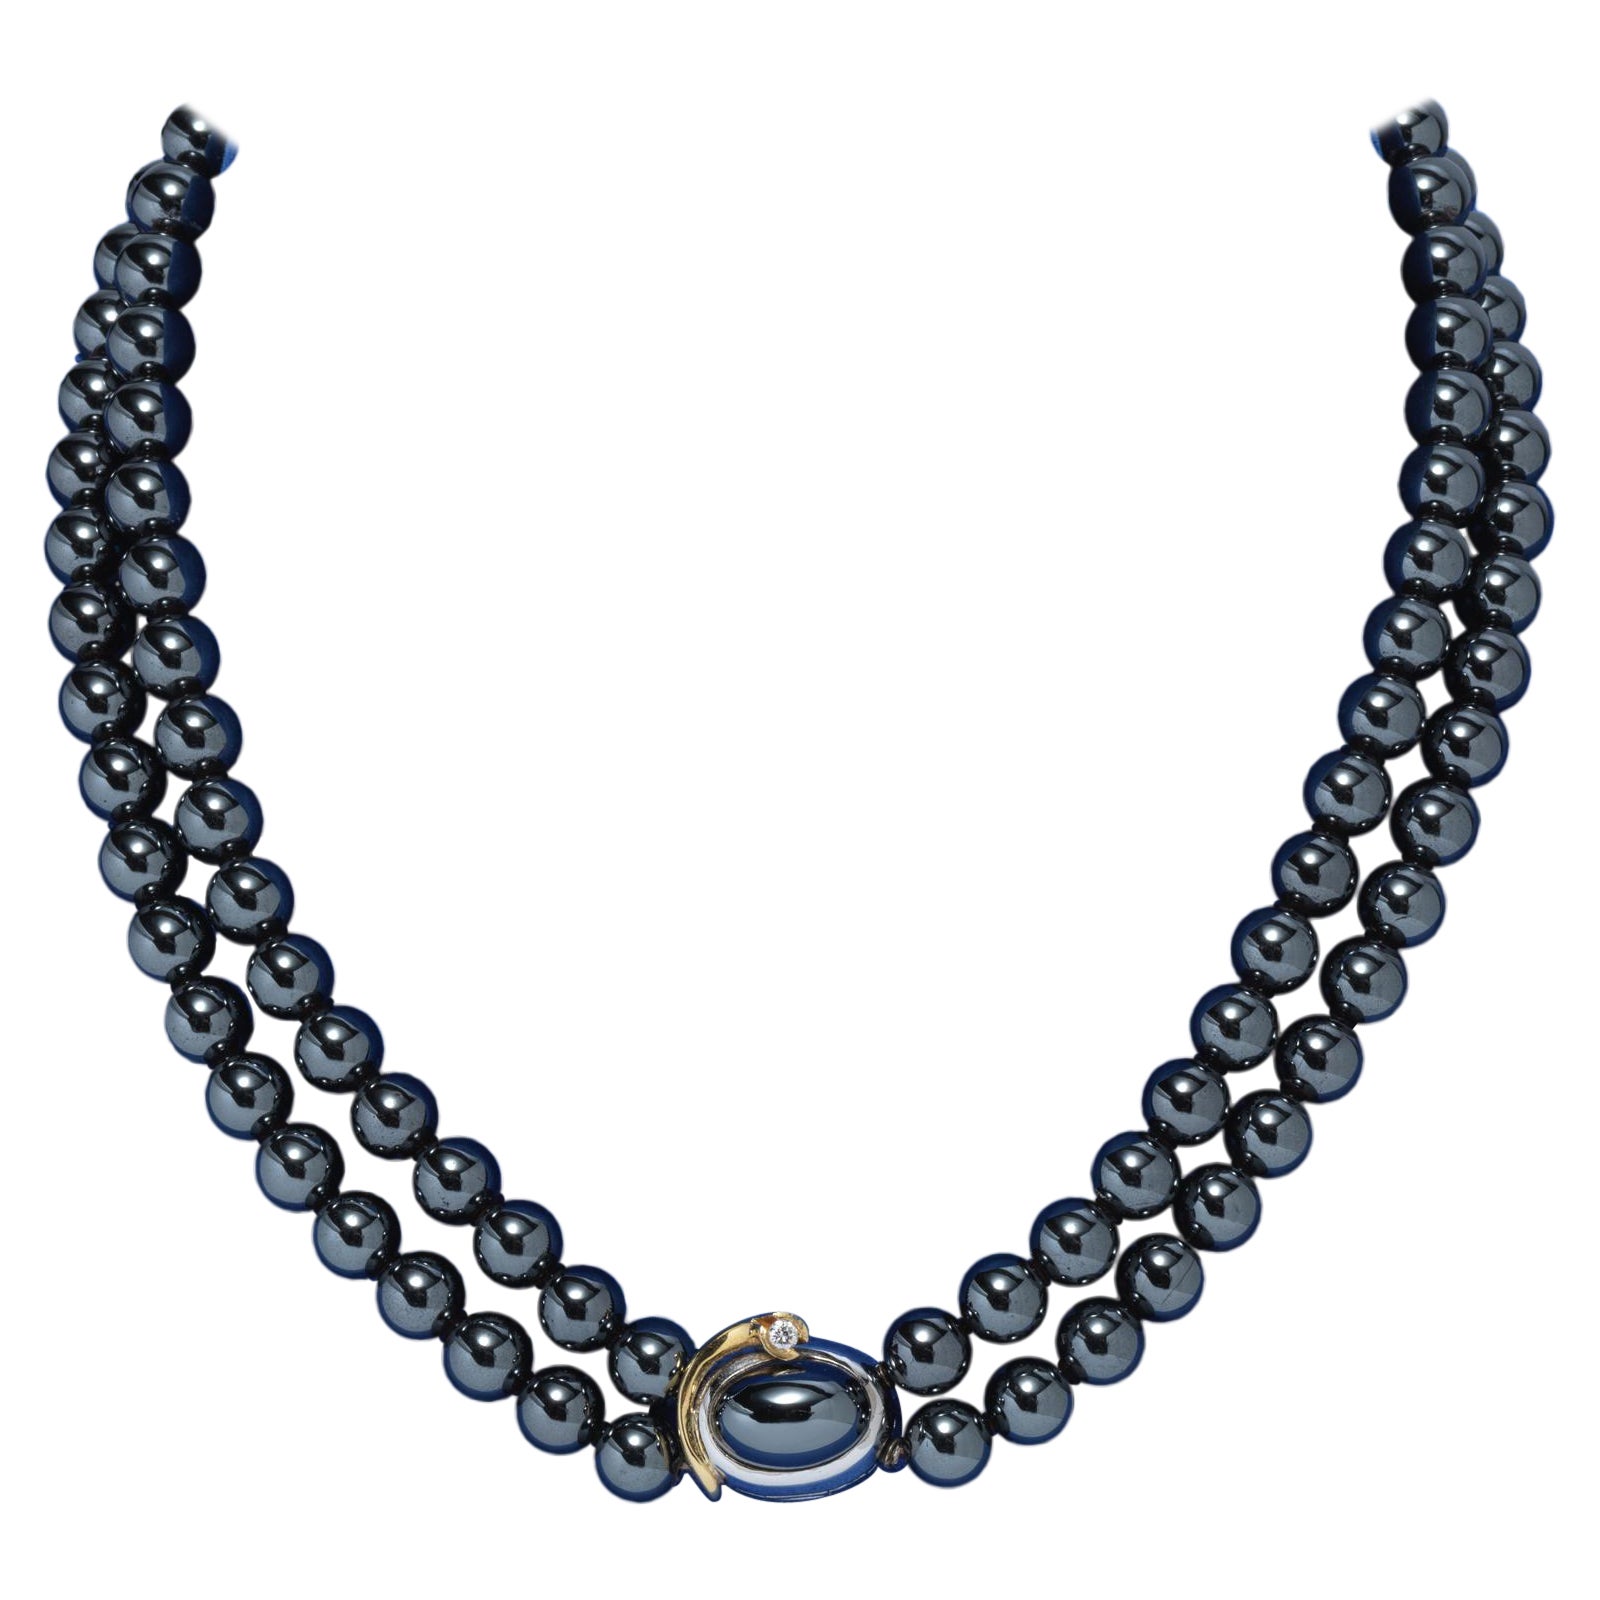 Ole Lynggaard necklace with hematite beads. Lock made of gold with a diamond.